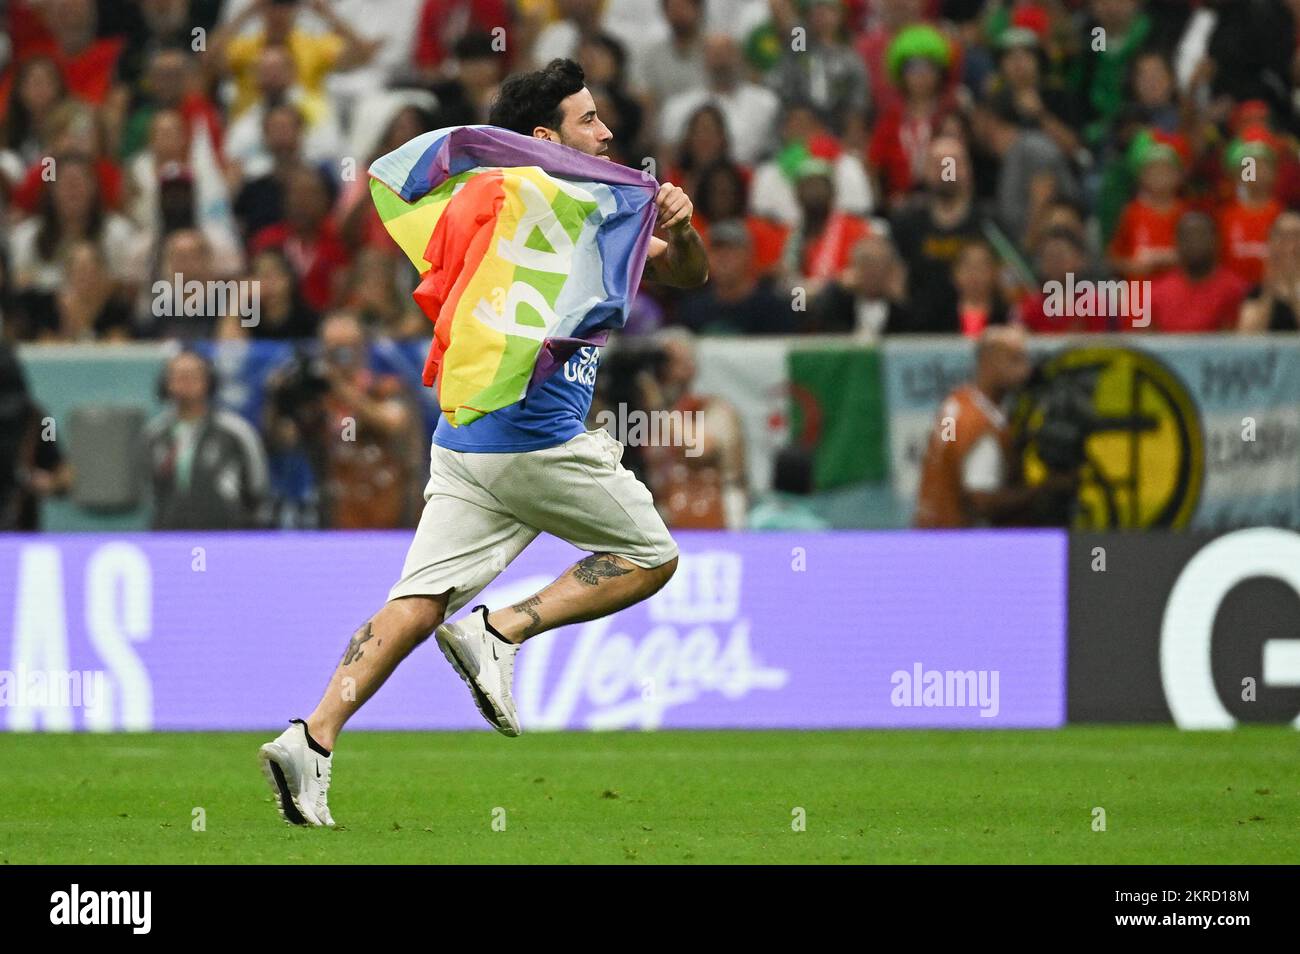 Doha, Qatar. 28th Nov, 2022. A man carrying a rainbow flag and wearing a T-shirt in support of Iranian women ran into the pitch during Portugal v Uruguay match of the Fifa World Cup Qatar 2022 Al Lusail Stadium in Doha, Qatar on November 28, 2022. Photo by Laurent Zabulon/ABACAPRESS.COM Credit: Abaca Press/Alamy Live News Stock Photo